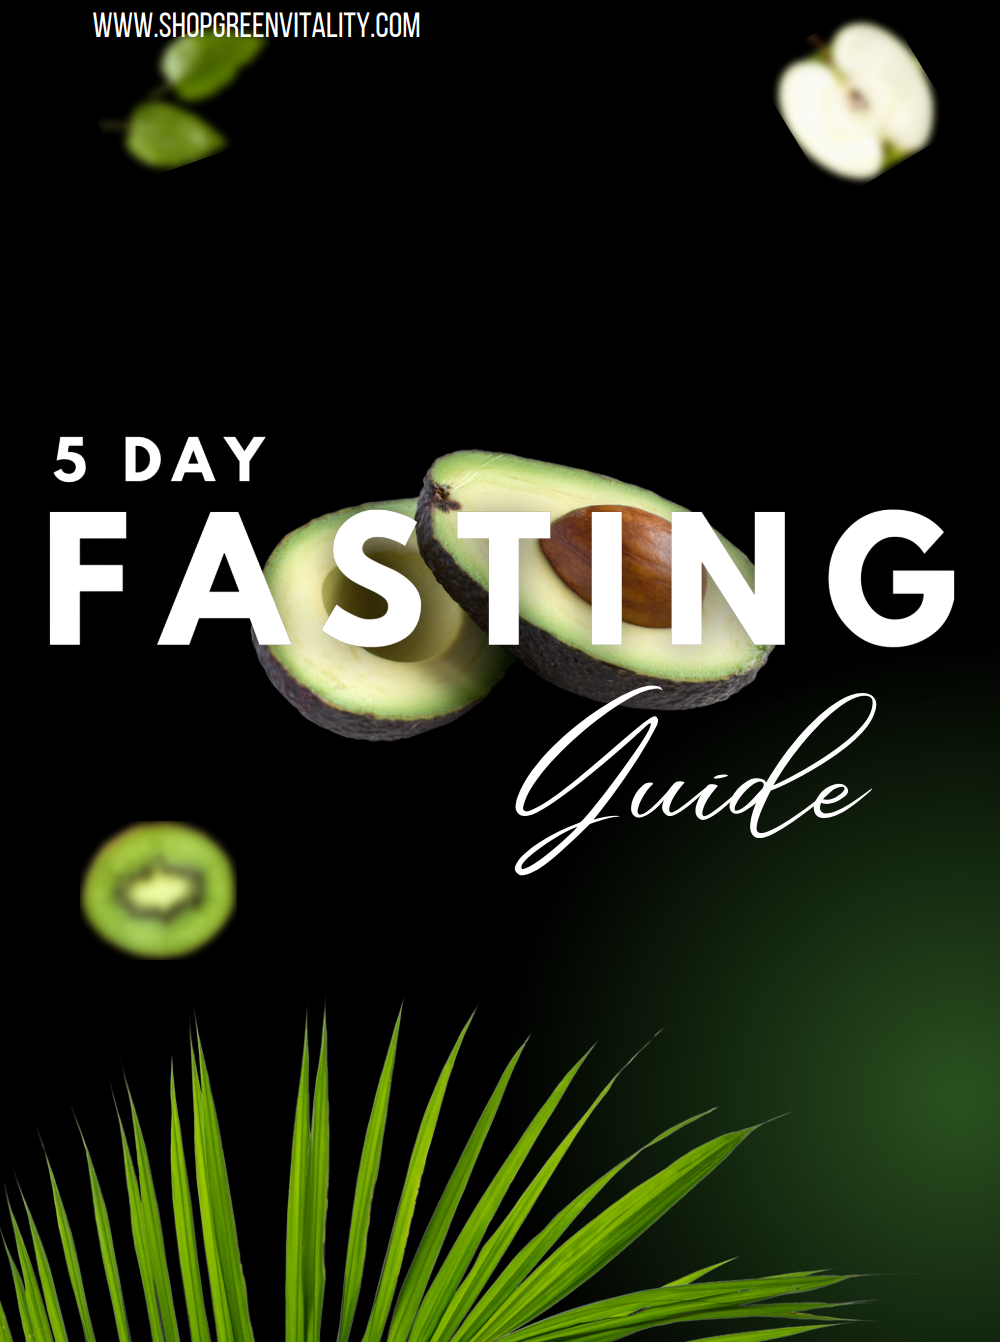 5 Day Fasting Guide